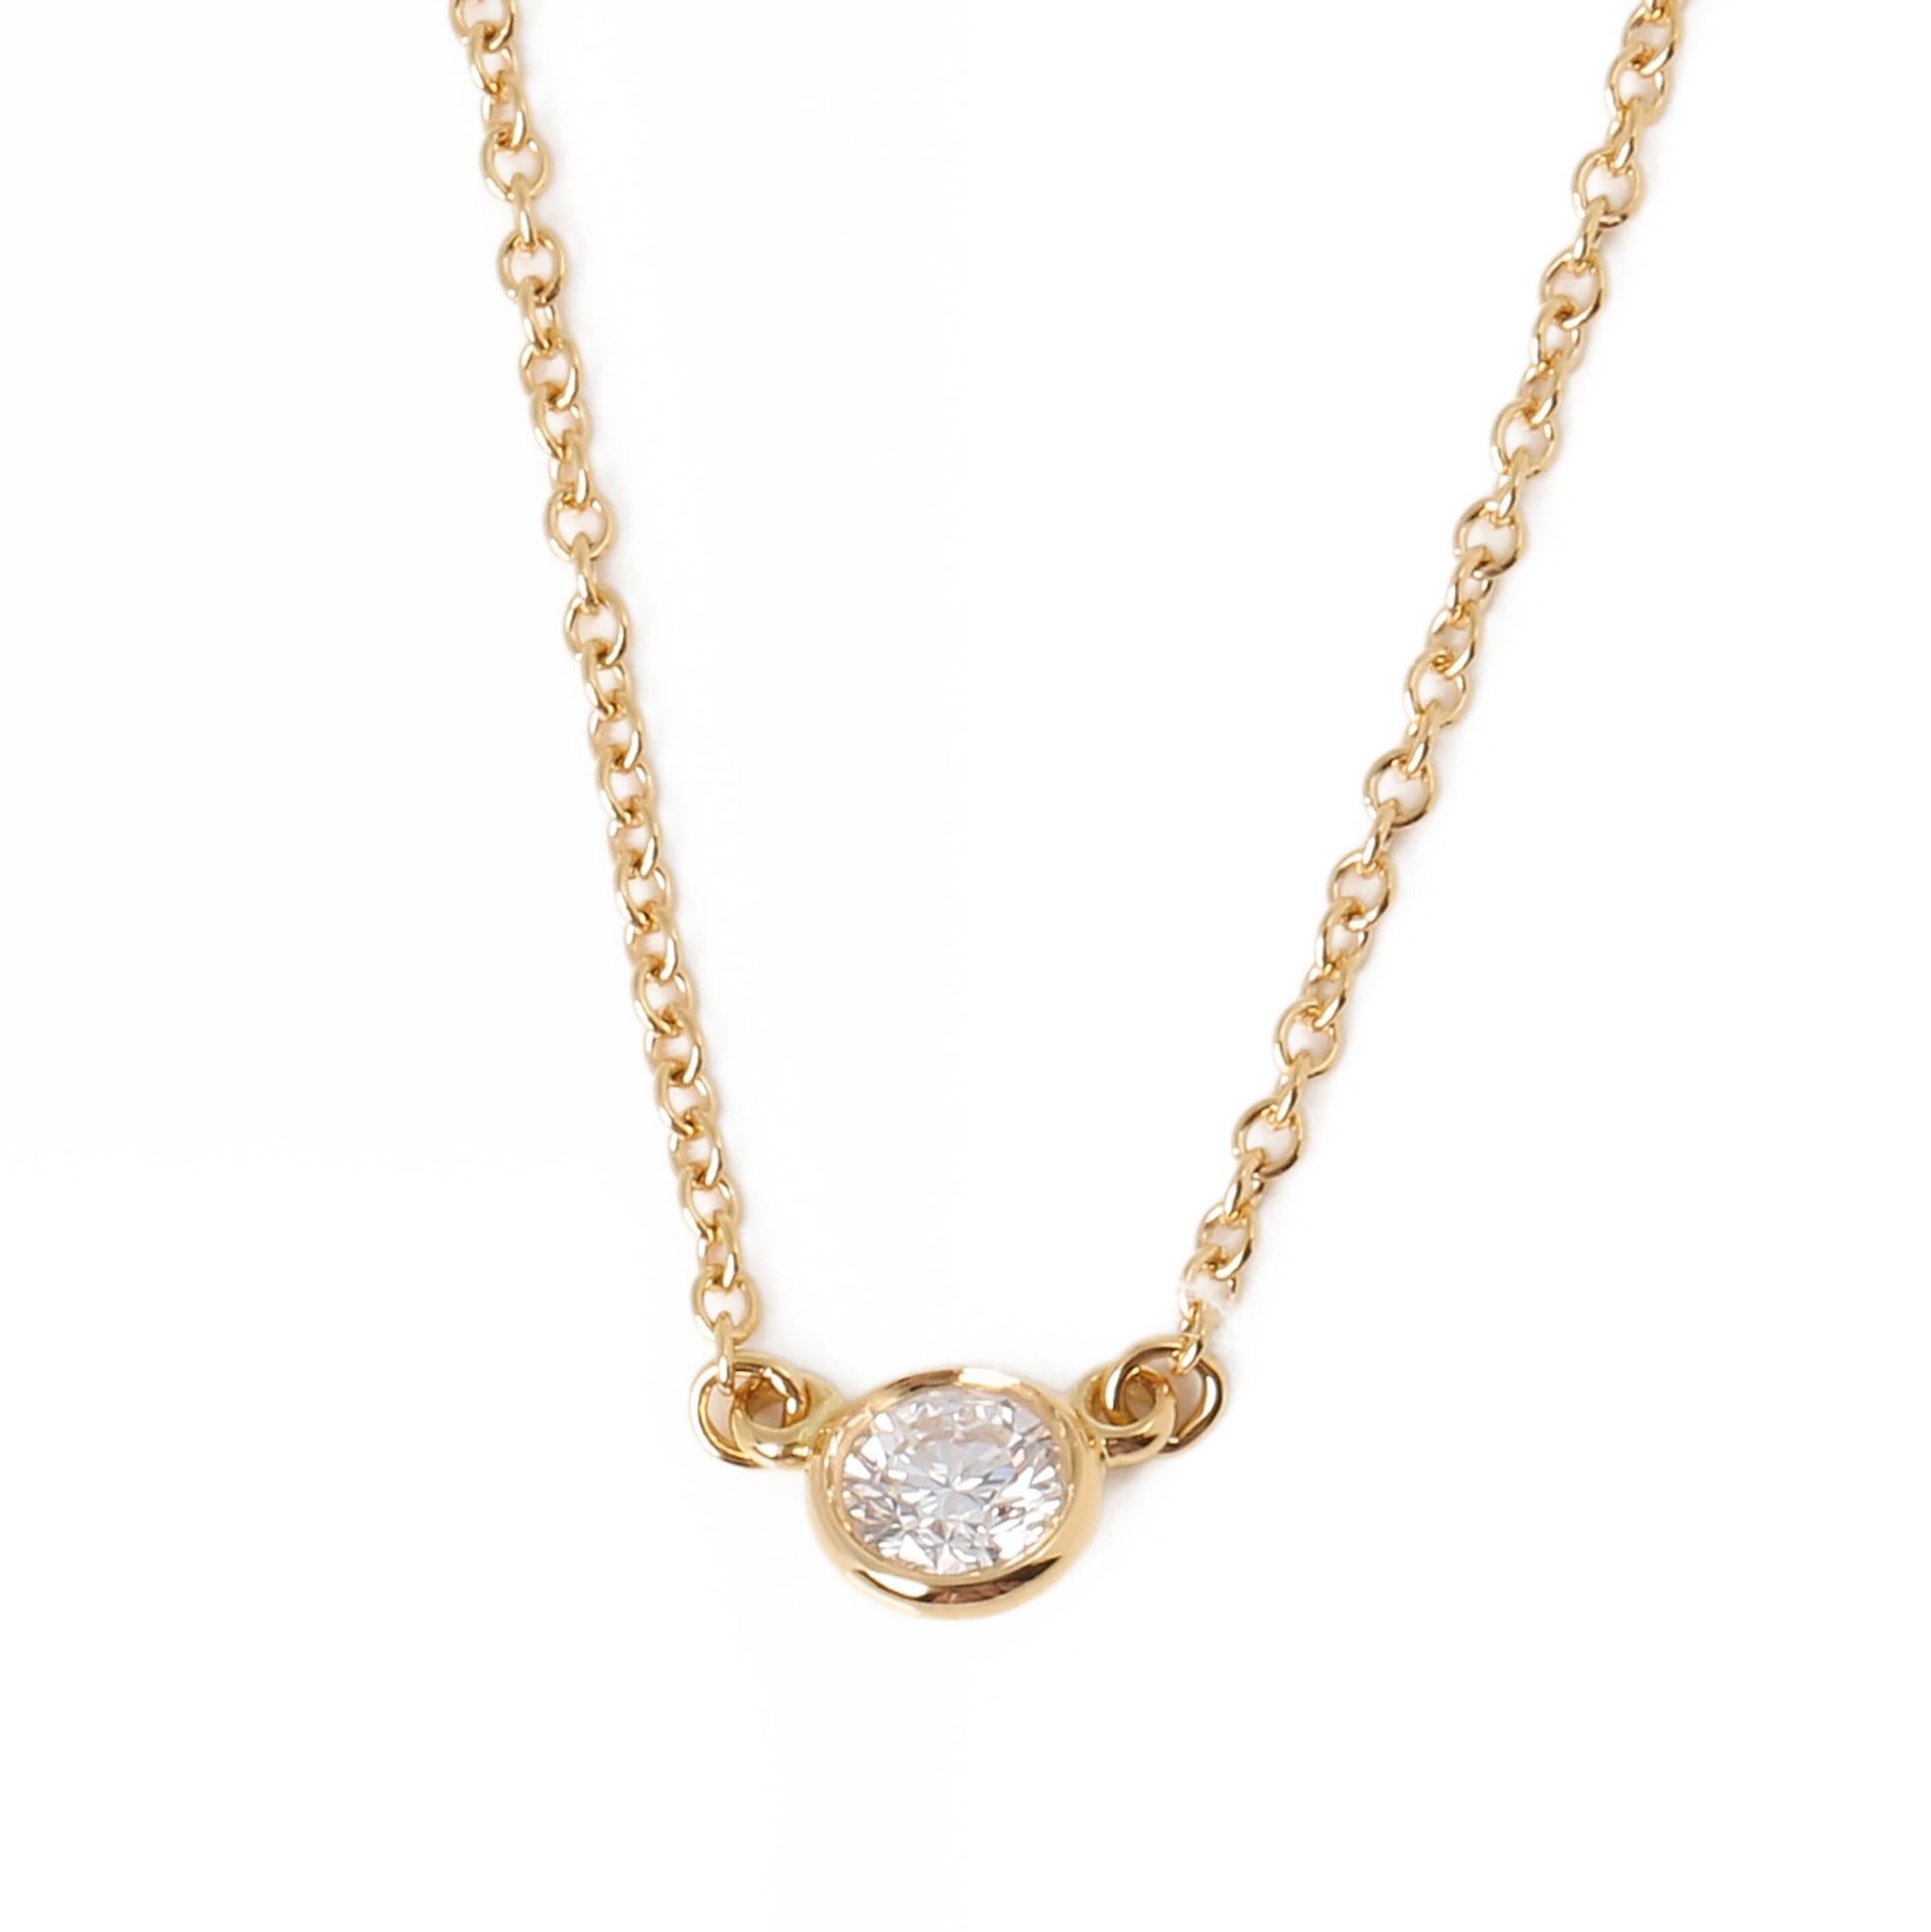 This pendant by Tiffany & Co is from the Elsa Peretti diamonds by the yard collection and features a solitaire round brilliant cut diamond mounted in 18ct yellow gold. Complete with Tiffany pouch and outer box. Our Xupes reference is J530 should you